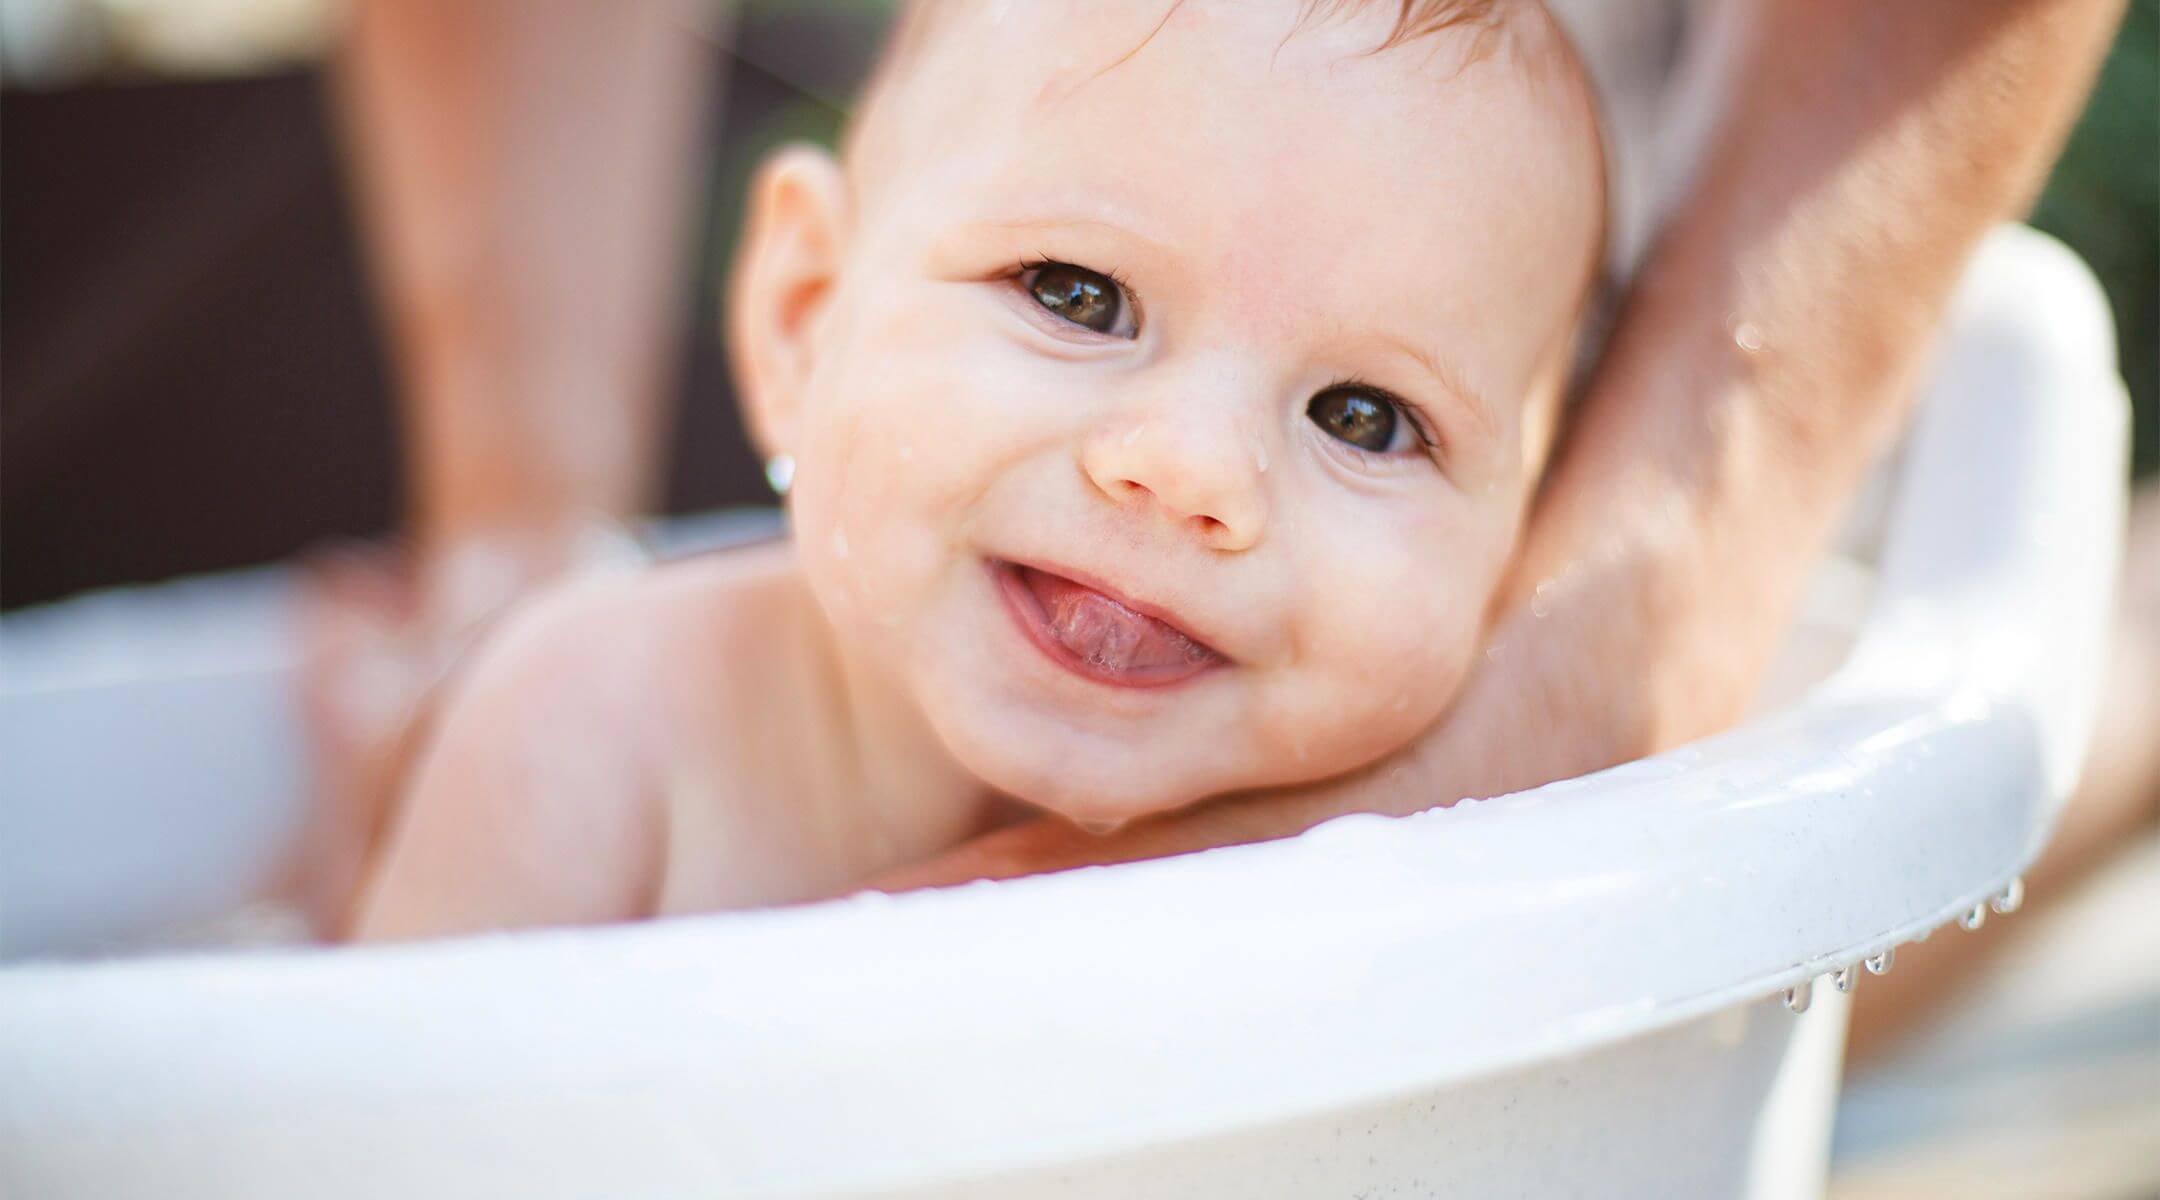 Bath time may be messy and all but it can also be a fun way to spend time with the whole family